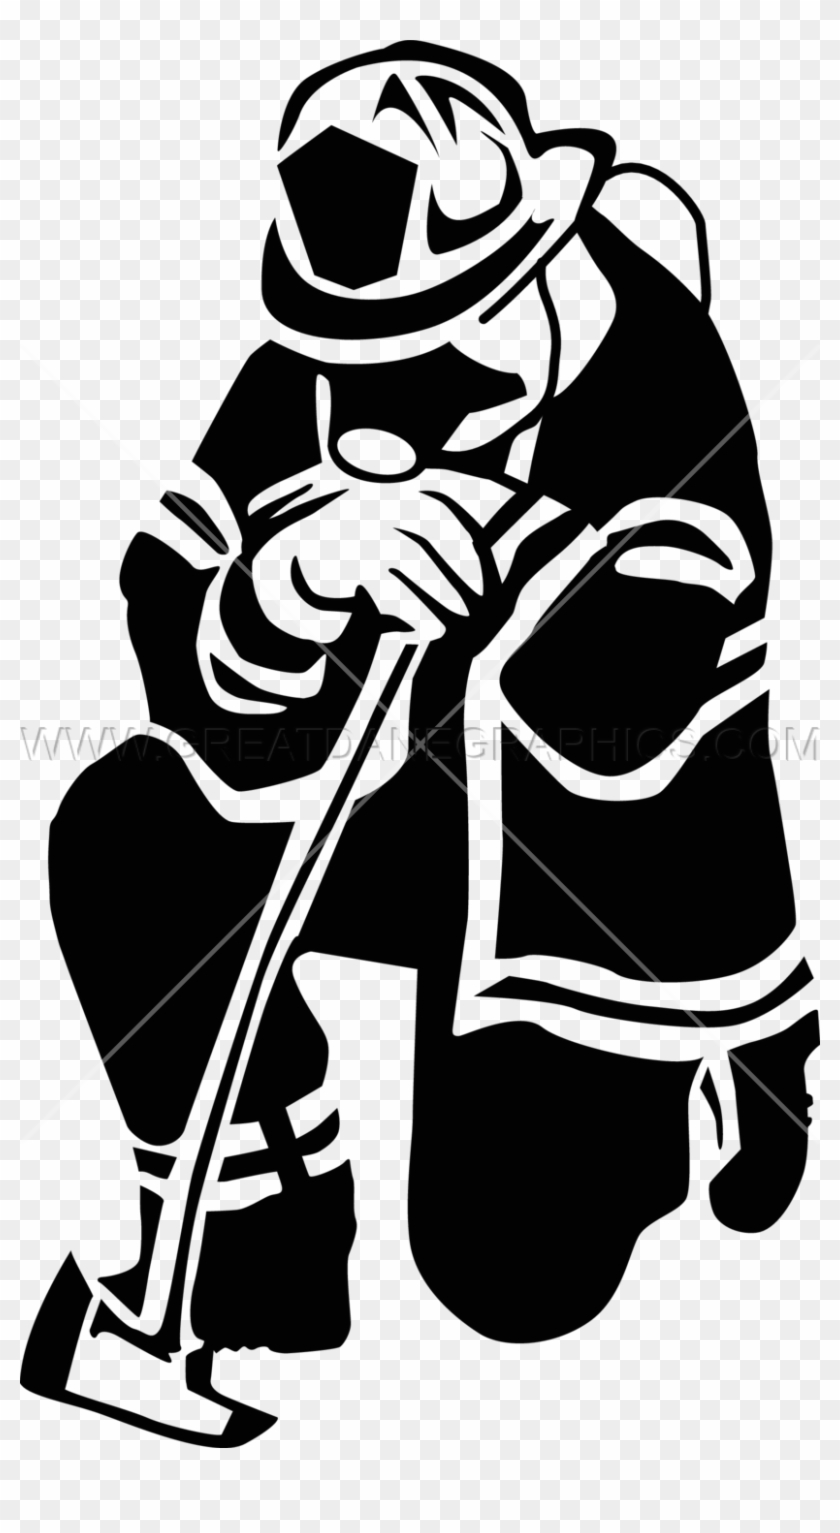 Firefighter Clipart Transparent - Firefighter Black And White Png